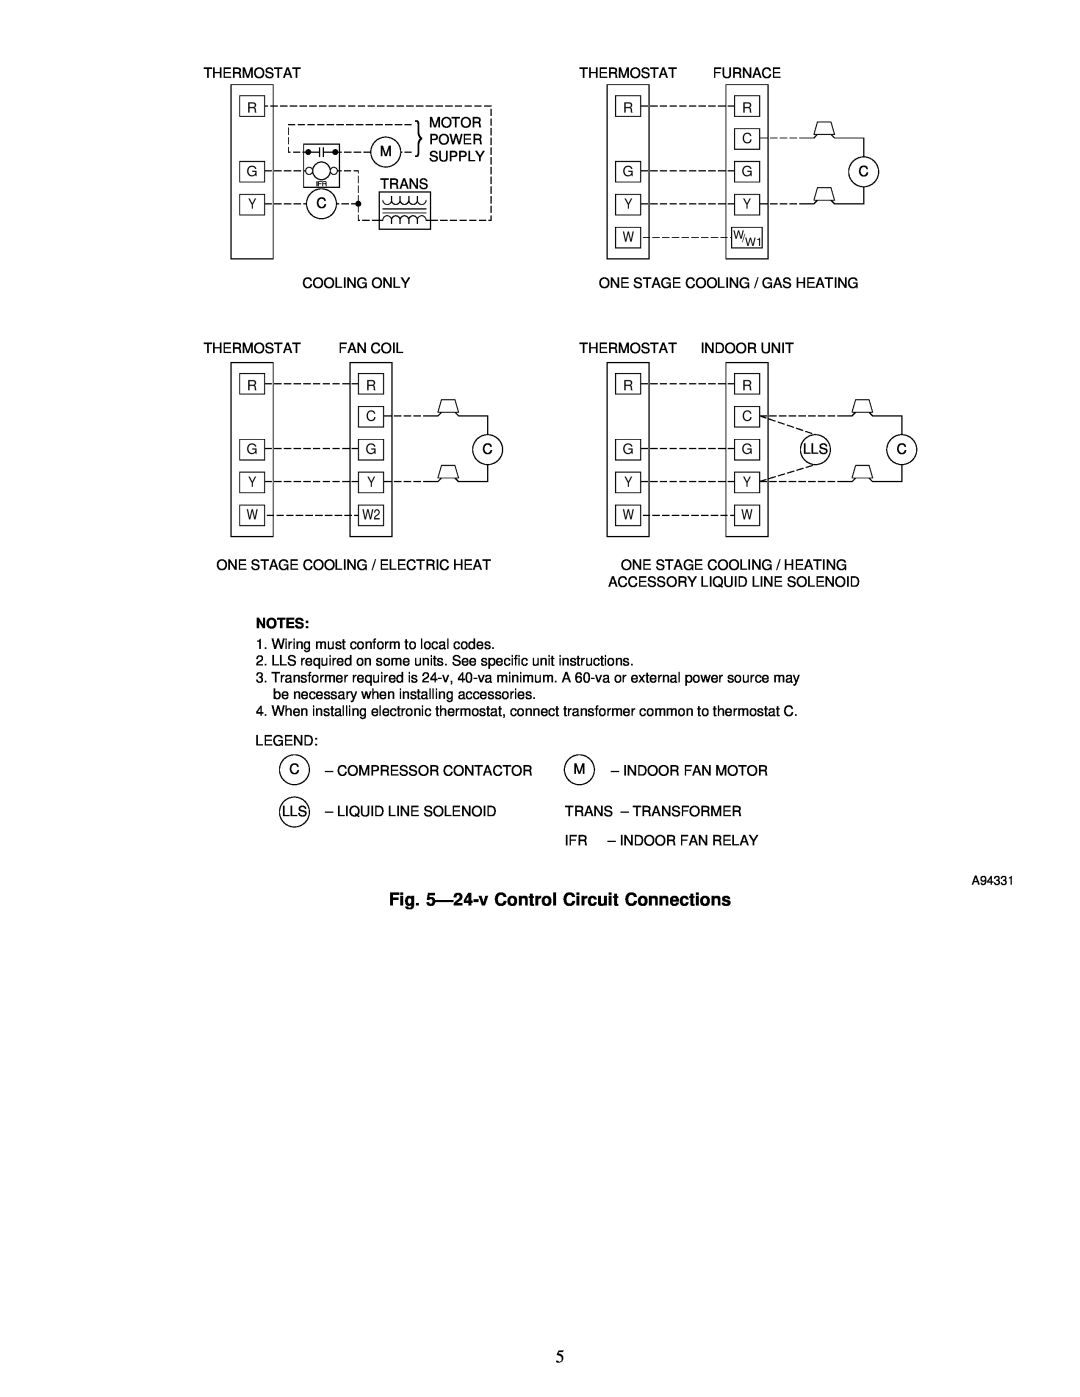 Carrier 38CKB instruction manual Ð24-v Control Circuit Connections 